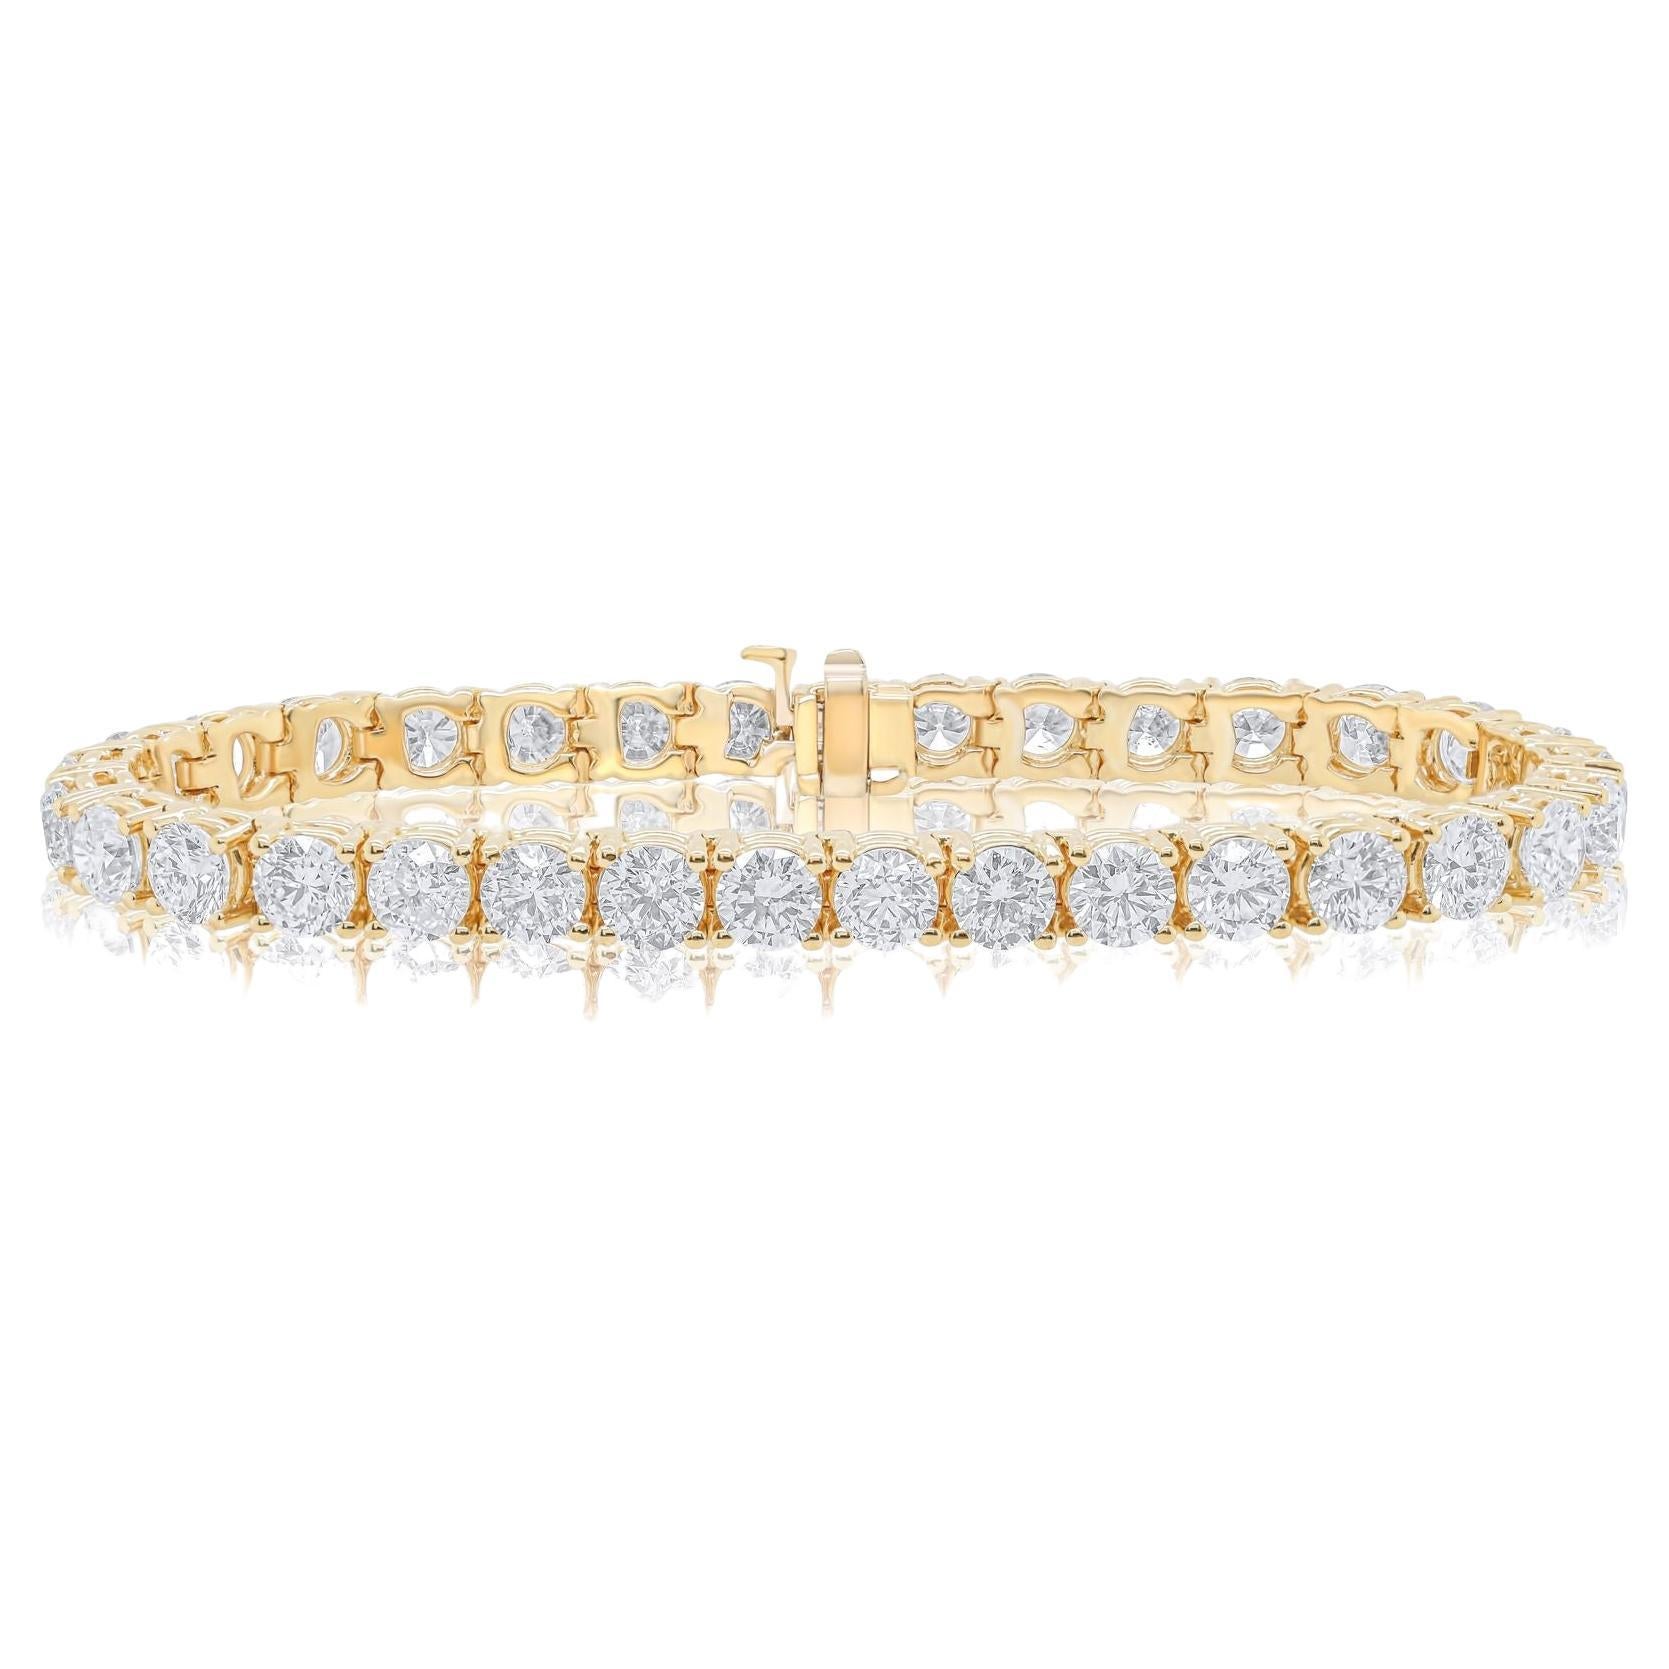 Diana M. 18 kt yellow gold 4 prong diamond tennis bracelet adorned with 16.30ct For Sale